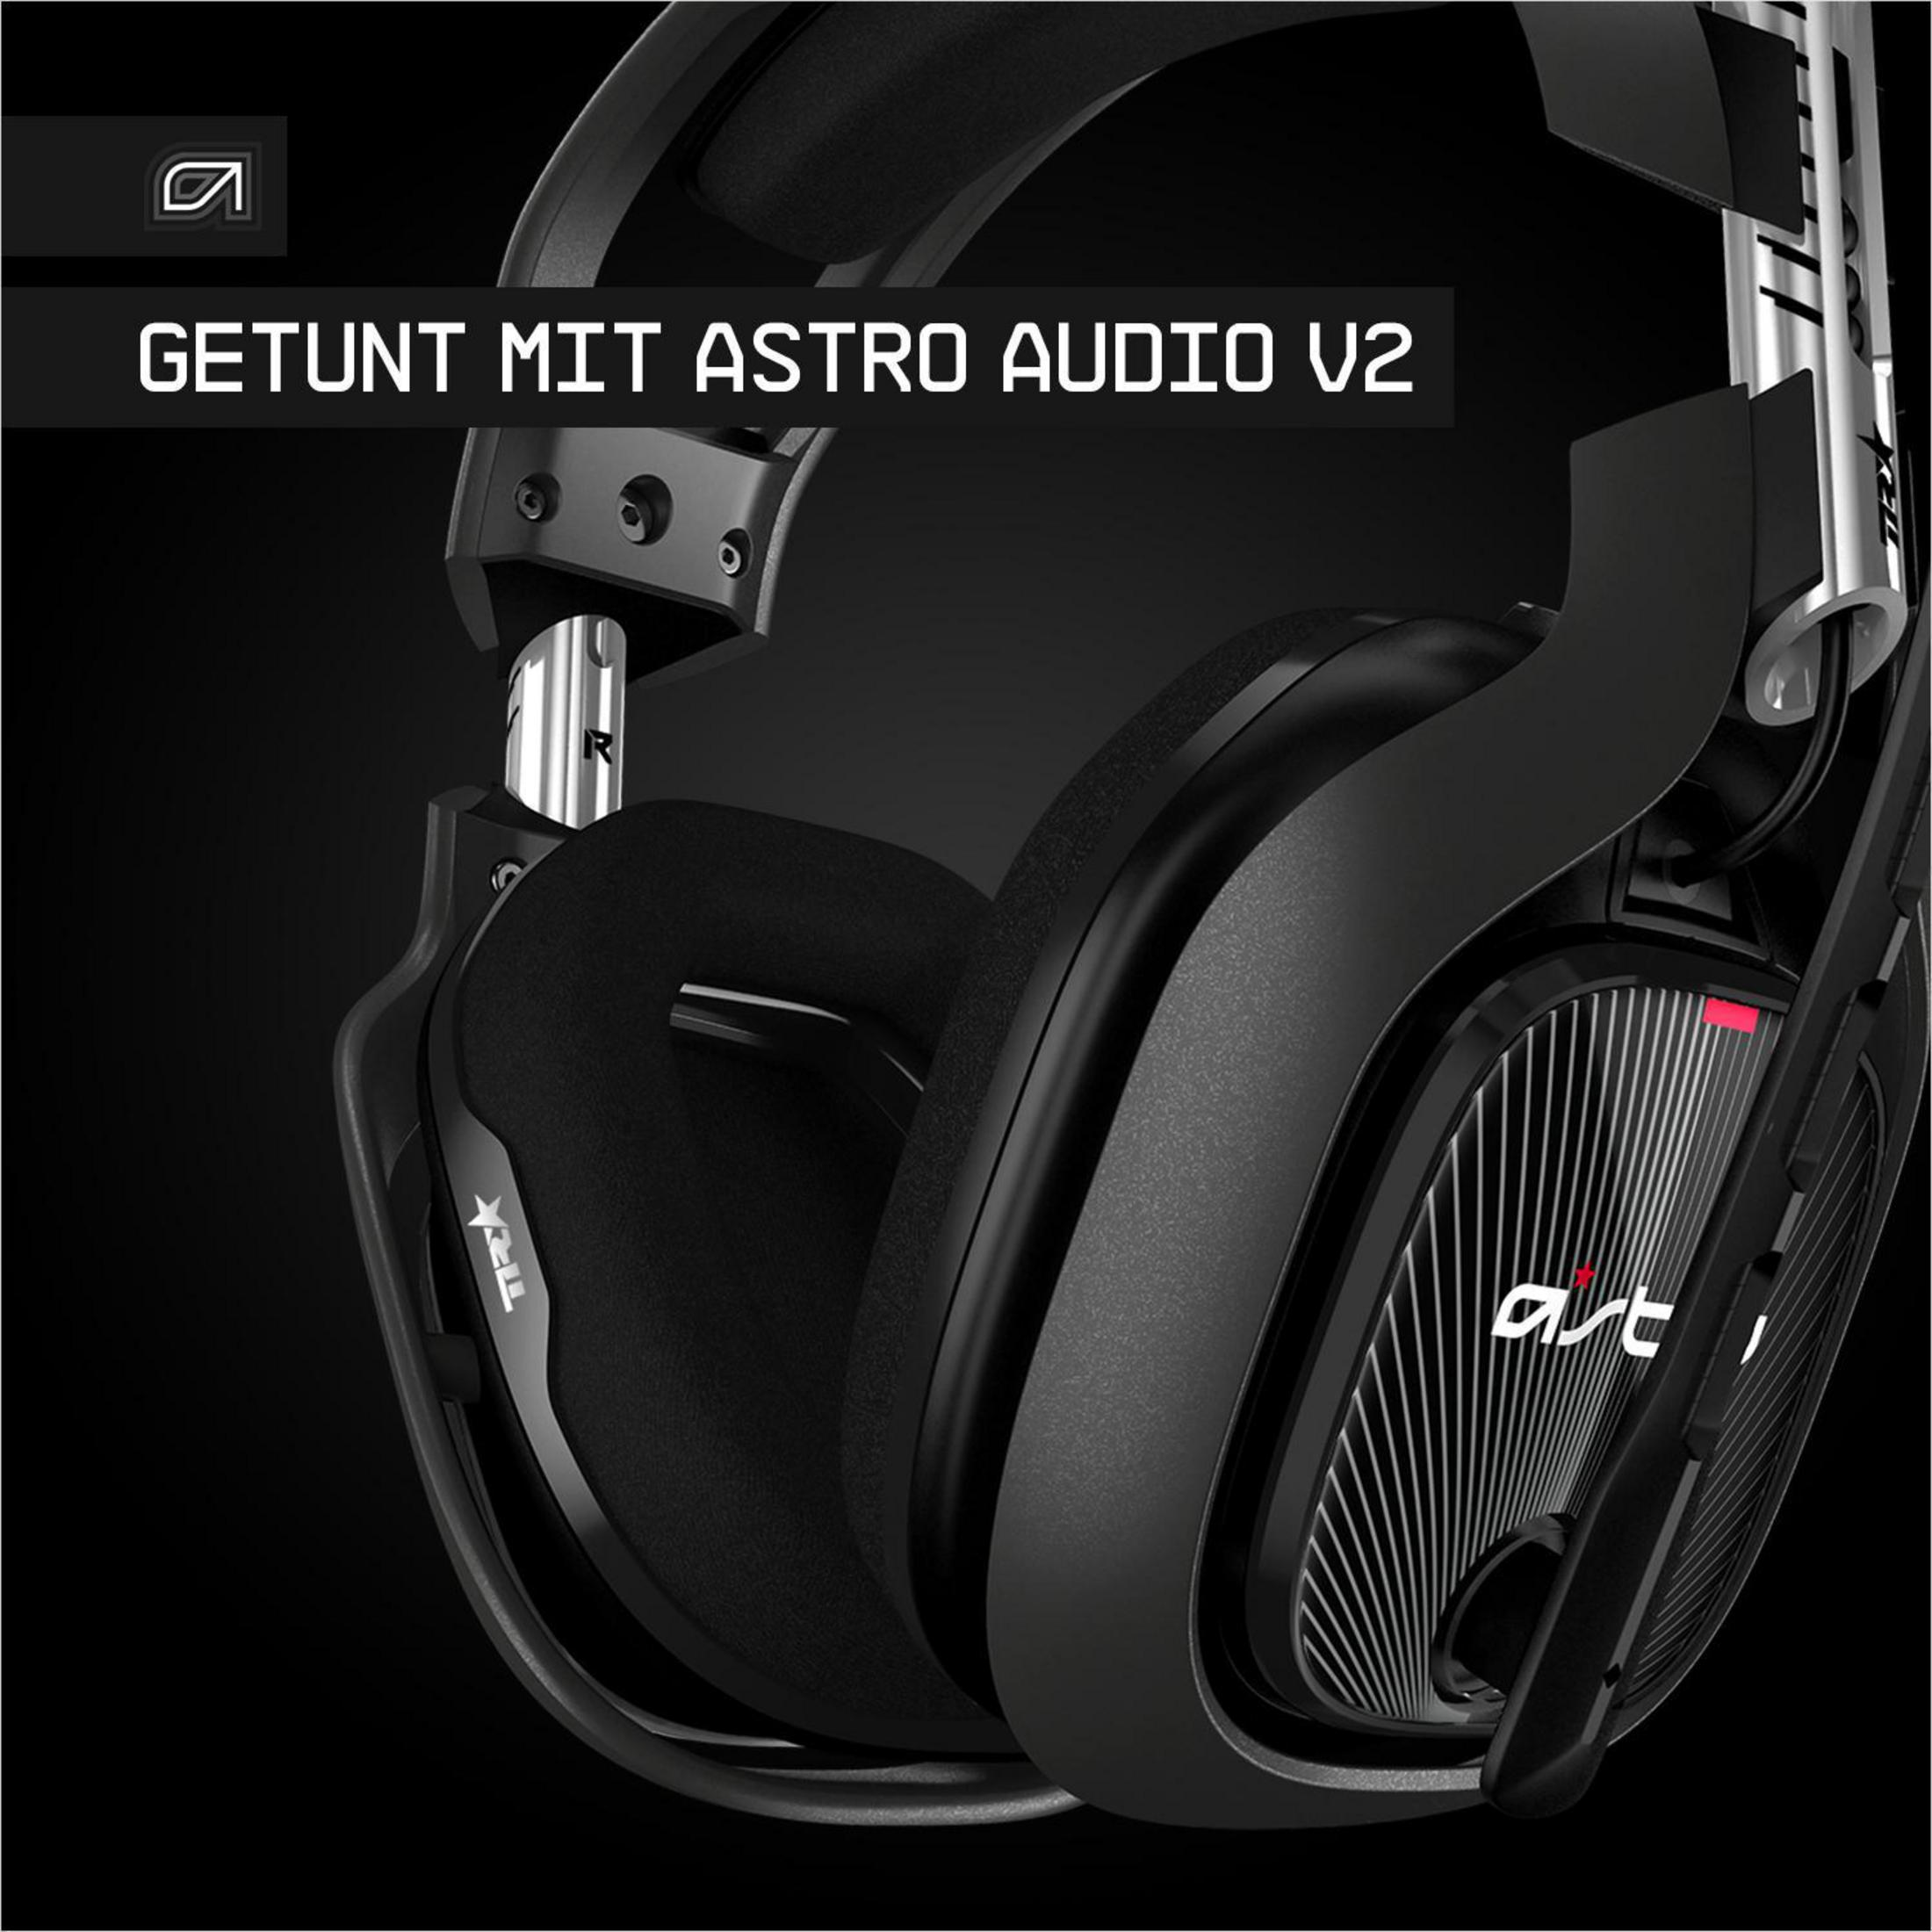 Schwarz A40 ASTRO HEADSET Headset XB1+PC, 939-001830 Over-ear TR Gaming GAMING